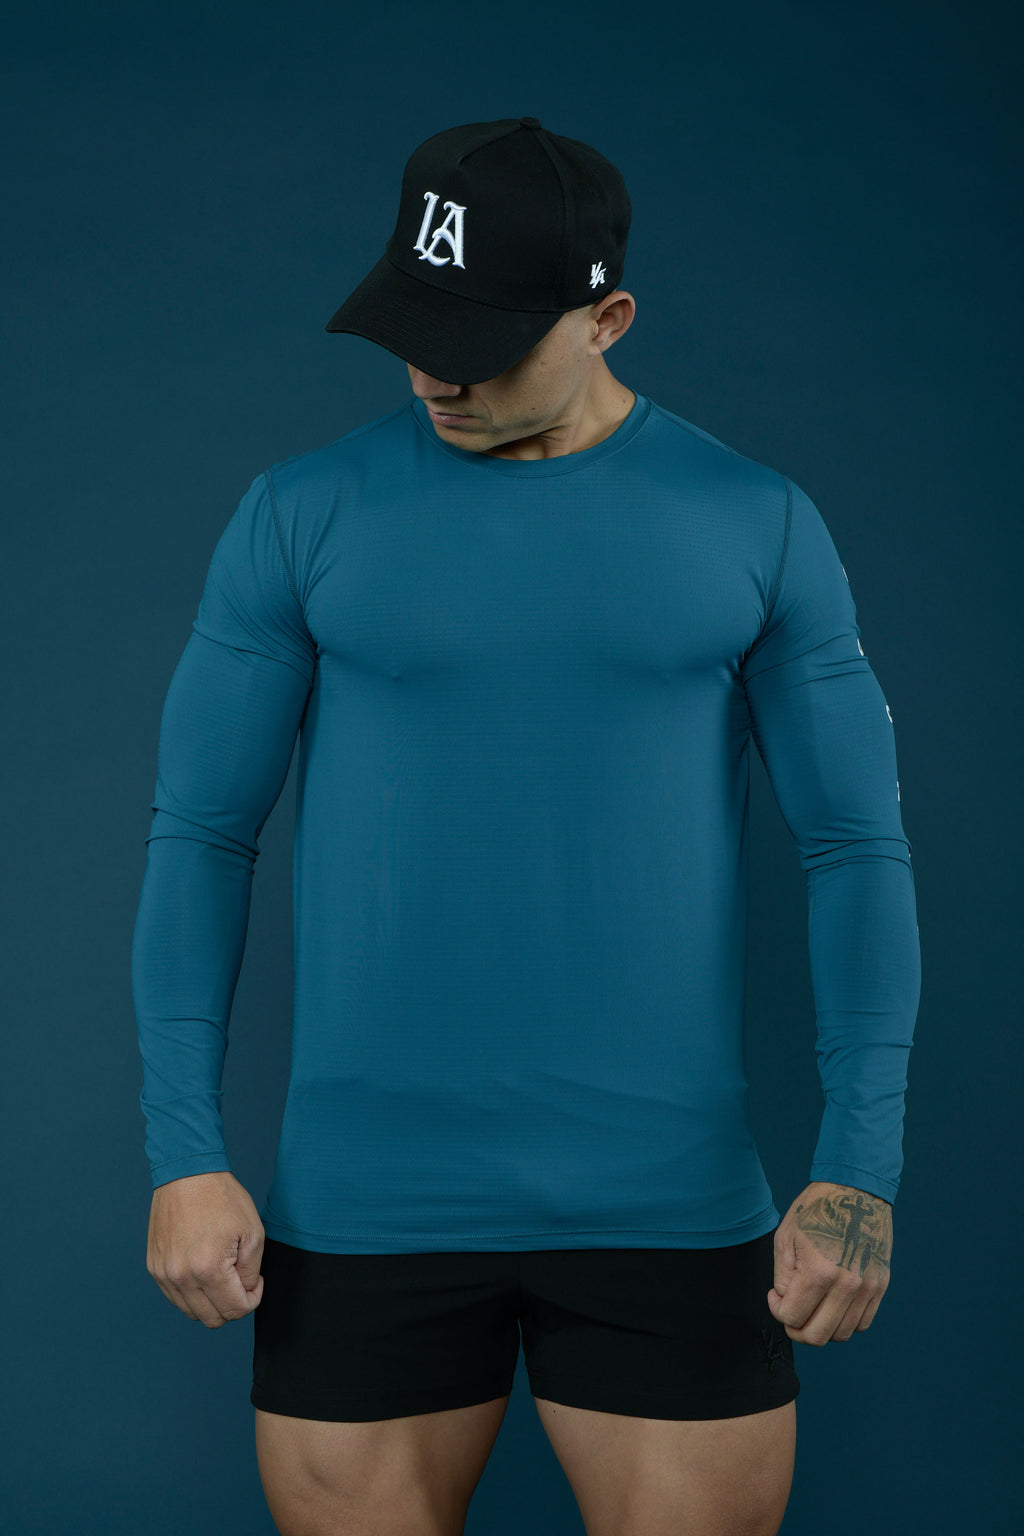 YoungLA Mens Restock Live!// Supervillain tees, Compression longsleeves, Immortal  Joggers, Monochrome Fitted Tees, Signature Tees, Peak Velocity Shorts,  Hybrid Tees, Washed Drip Tees, Executive Card Holder, Signature Hats -  YoungLA